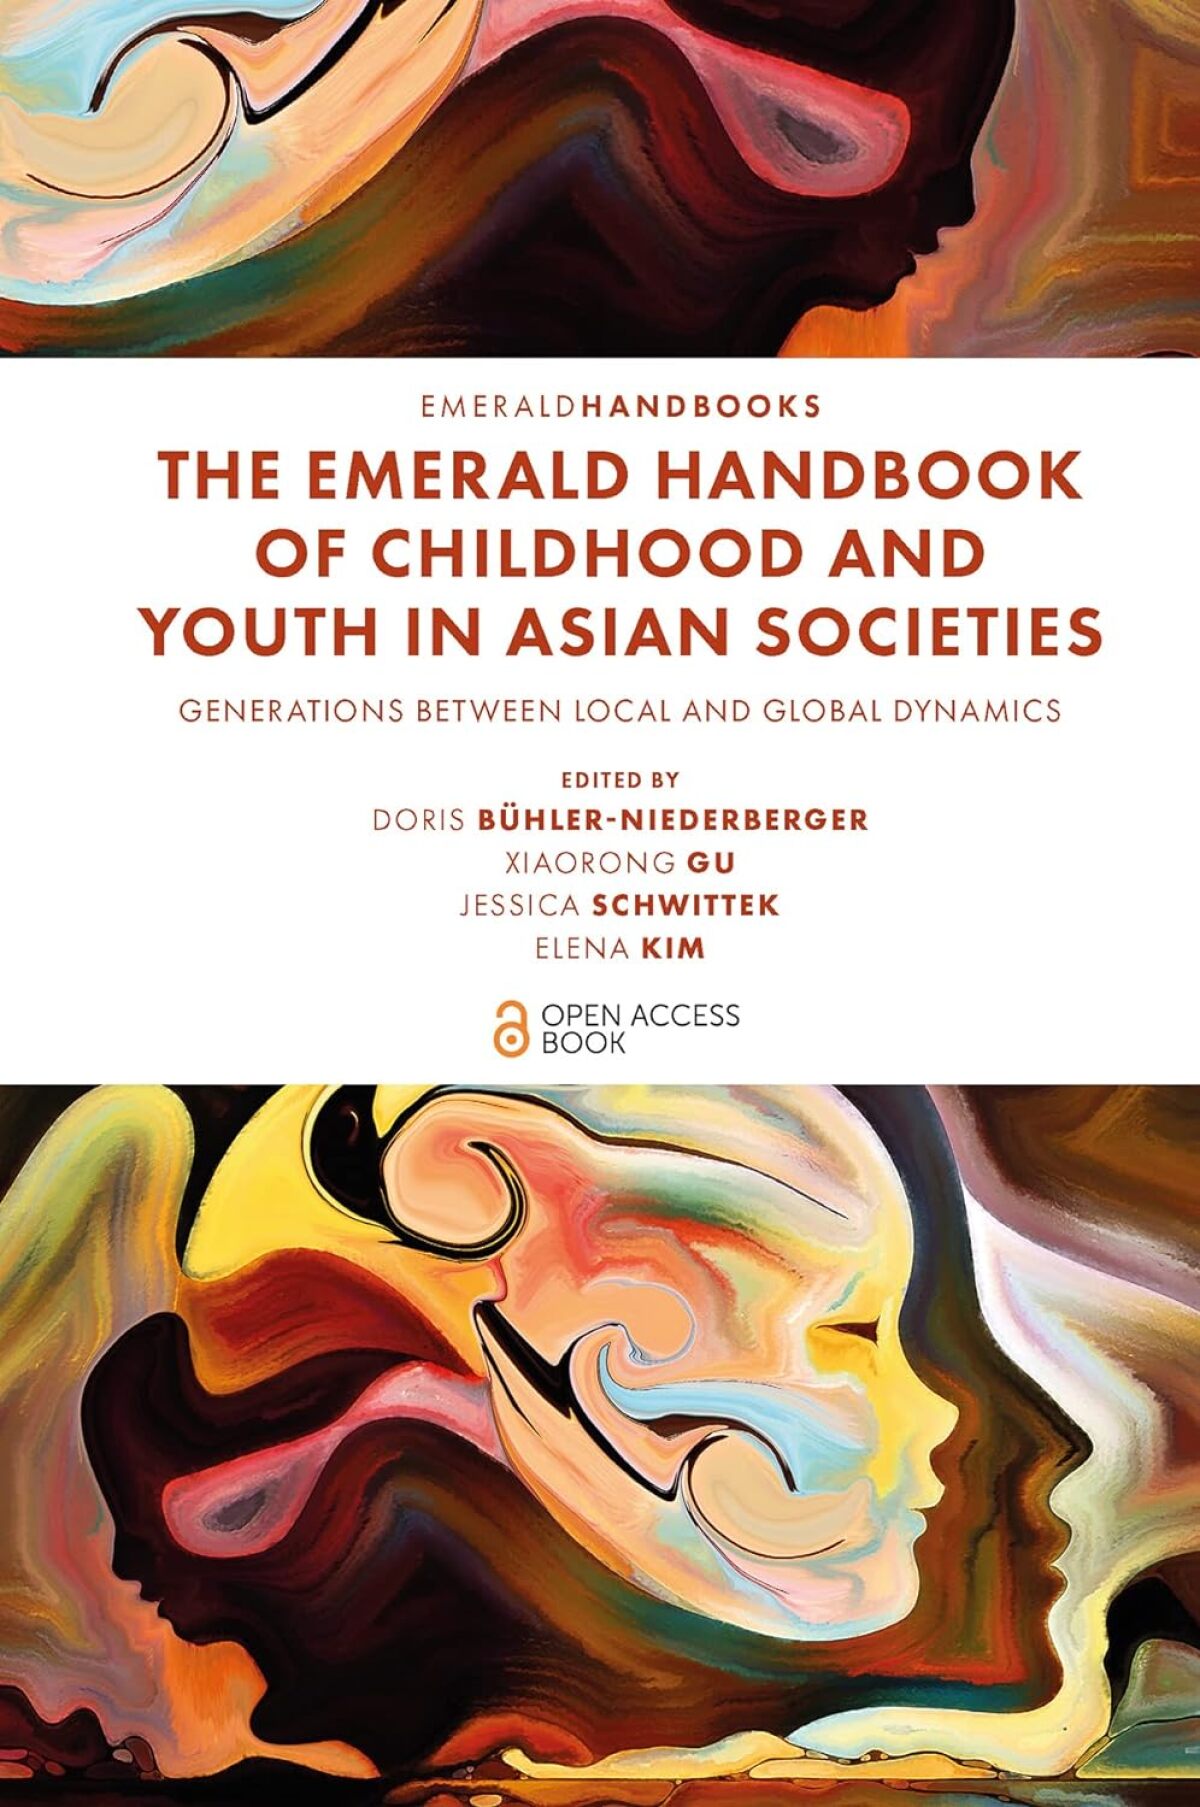 A photo of a book cover with the title "THE EMERALD HANDBOOK OF CHILDHOOD AND YOUTH IN ASIAN SOCIETIES: GENERATIONS BETWEEN LOCAL AND GLOBAL DYNAMICS," the text "EDITED BY DORIS BÜHLER-NIEDERBERGER, XIAORONG GU, JESSICA SCHWITTEK, ELENA KIM" and an abstract painting as the cover illustration.